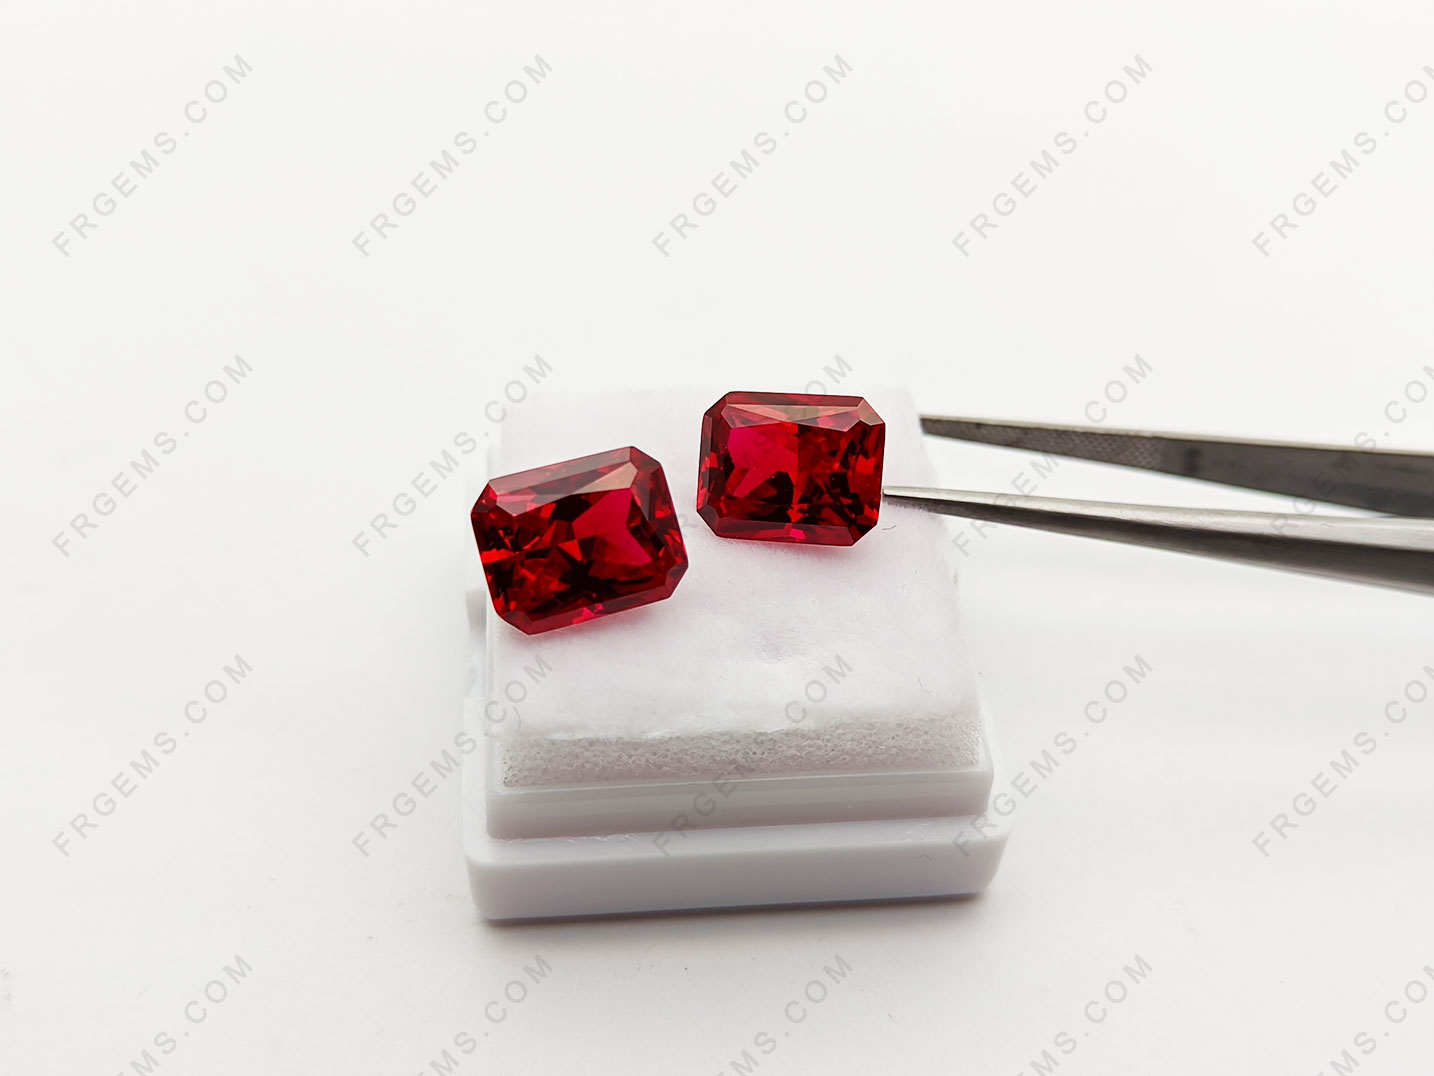 Lab Grown Pulled Czoahralski synthetic ruby Red Color Radiant Cut 10x8mm gemstones